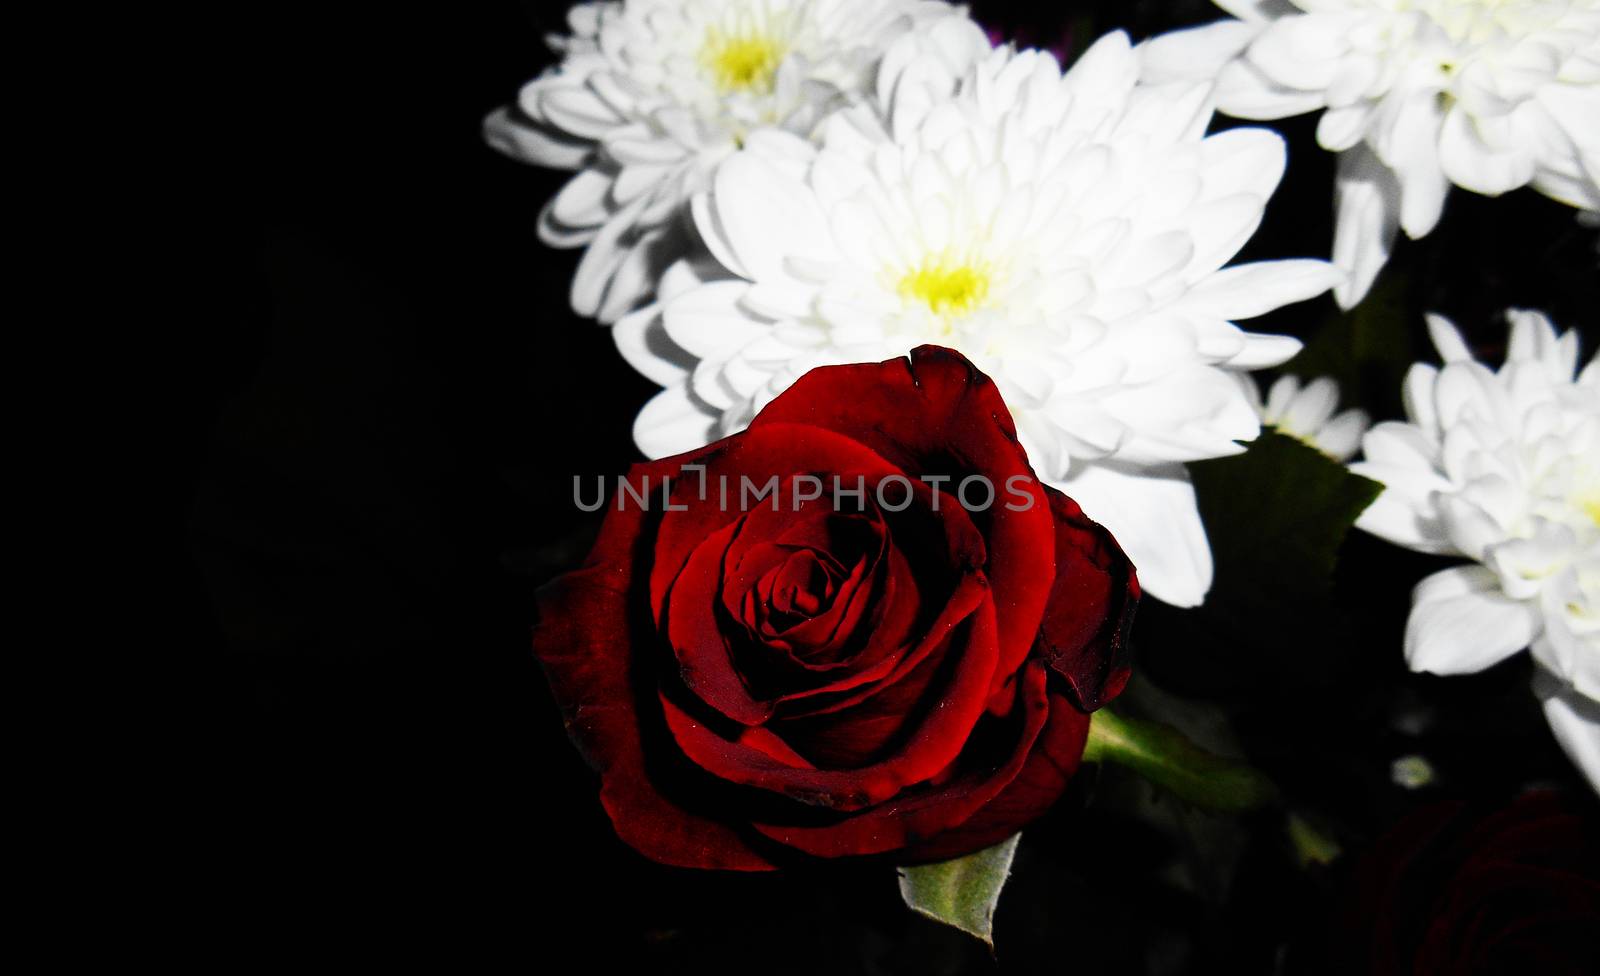 Red rose and white flowers, black background by ValEs1989